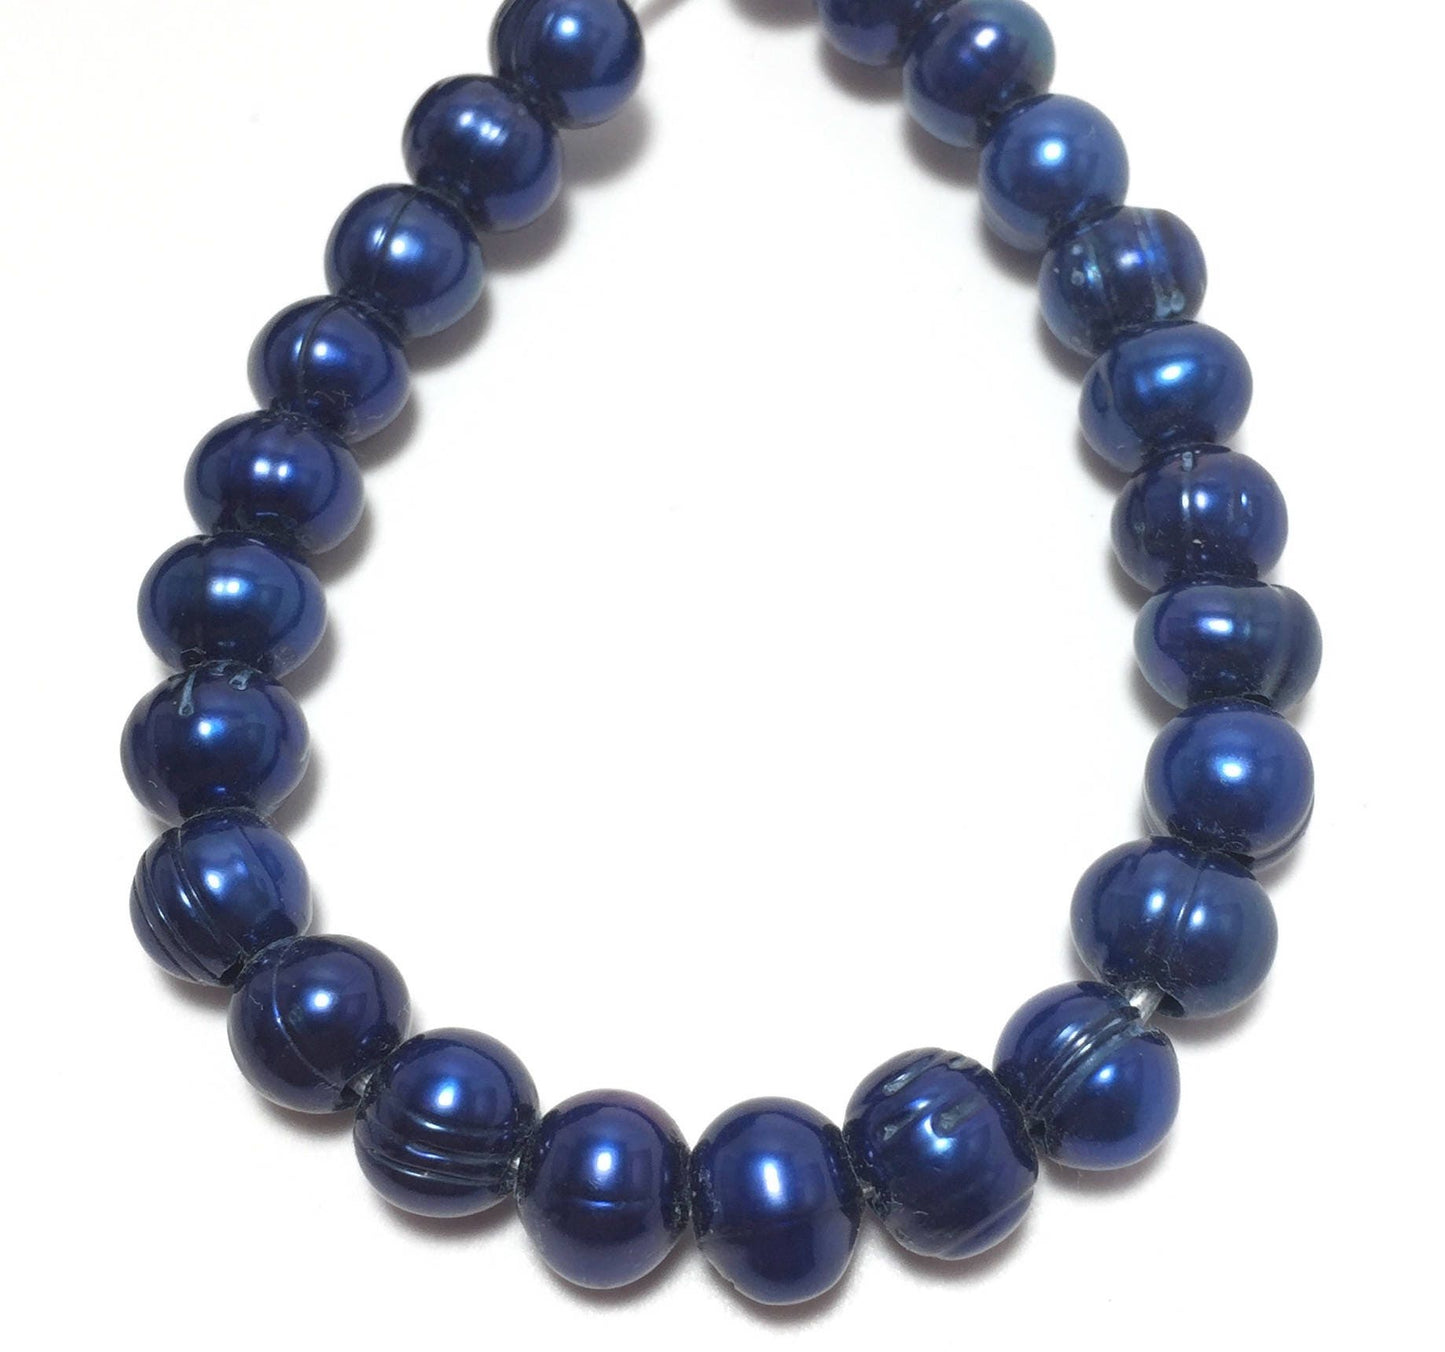 Large Hole Pearls, 8-9mm Potato Shape Royal Blue Color Freshwater Pearls, 8 inch strand with 2.5mm hole size, LH026